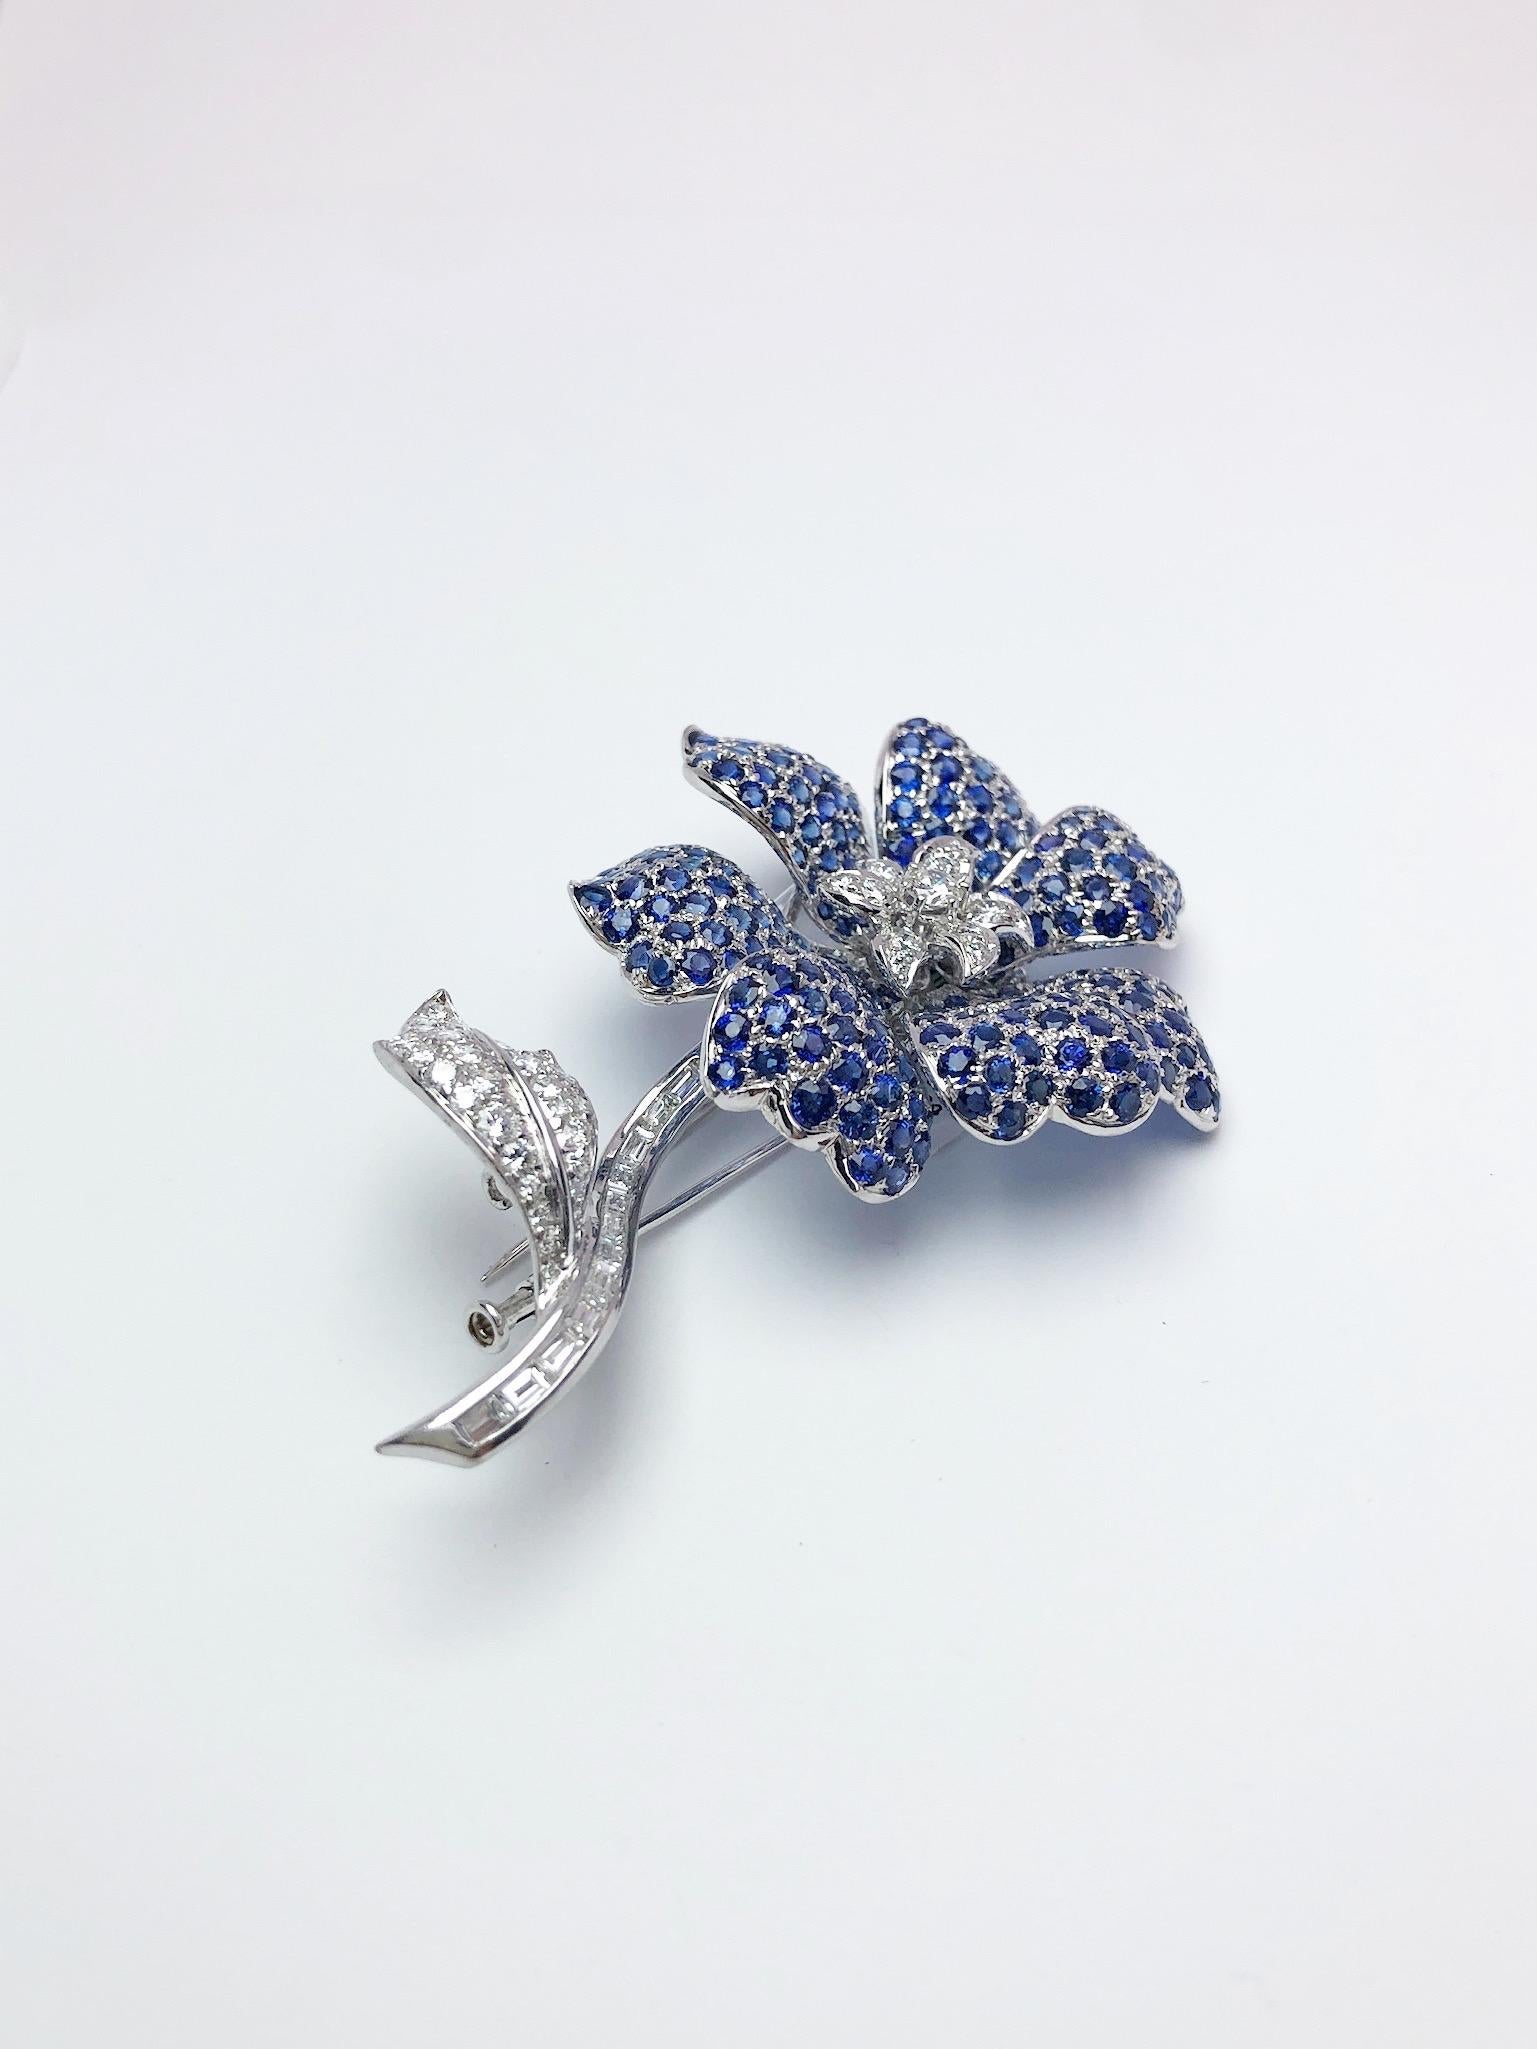 Cellini Jewelers Magnificent 18 karat white gold brooch .The flower is designed with seven petals that are set with round blue sapphires. The center area and the leaves are of round brilliant diamonds, the stem is set with baguette diamonds. The